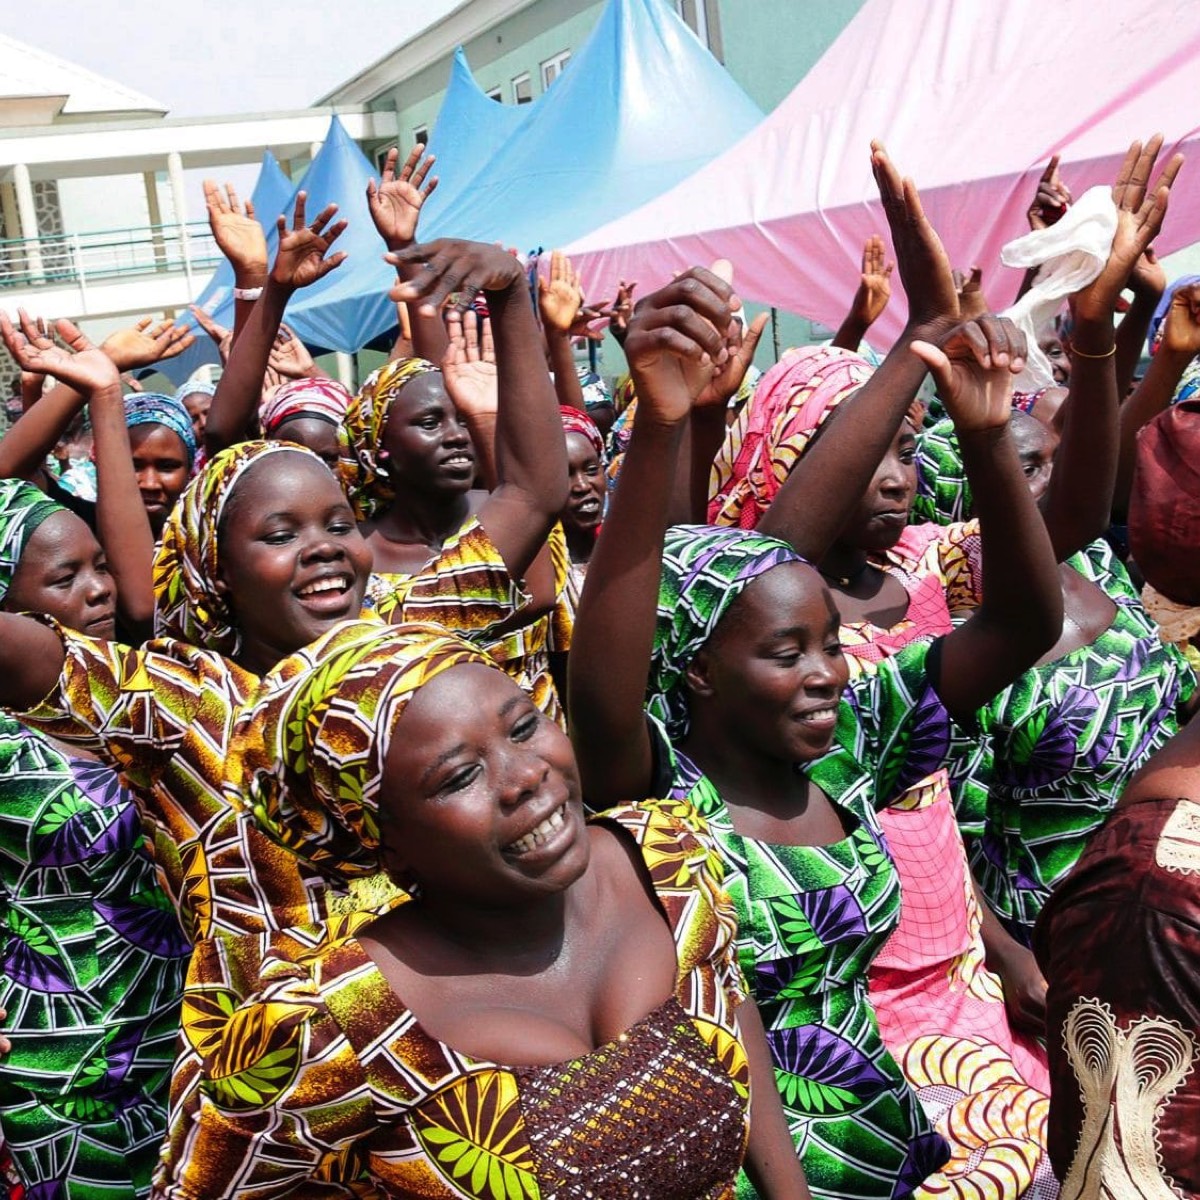 Some of the released girls celebrate before being reunited with their families [Photo: Sunday Aghaeze/AFP]